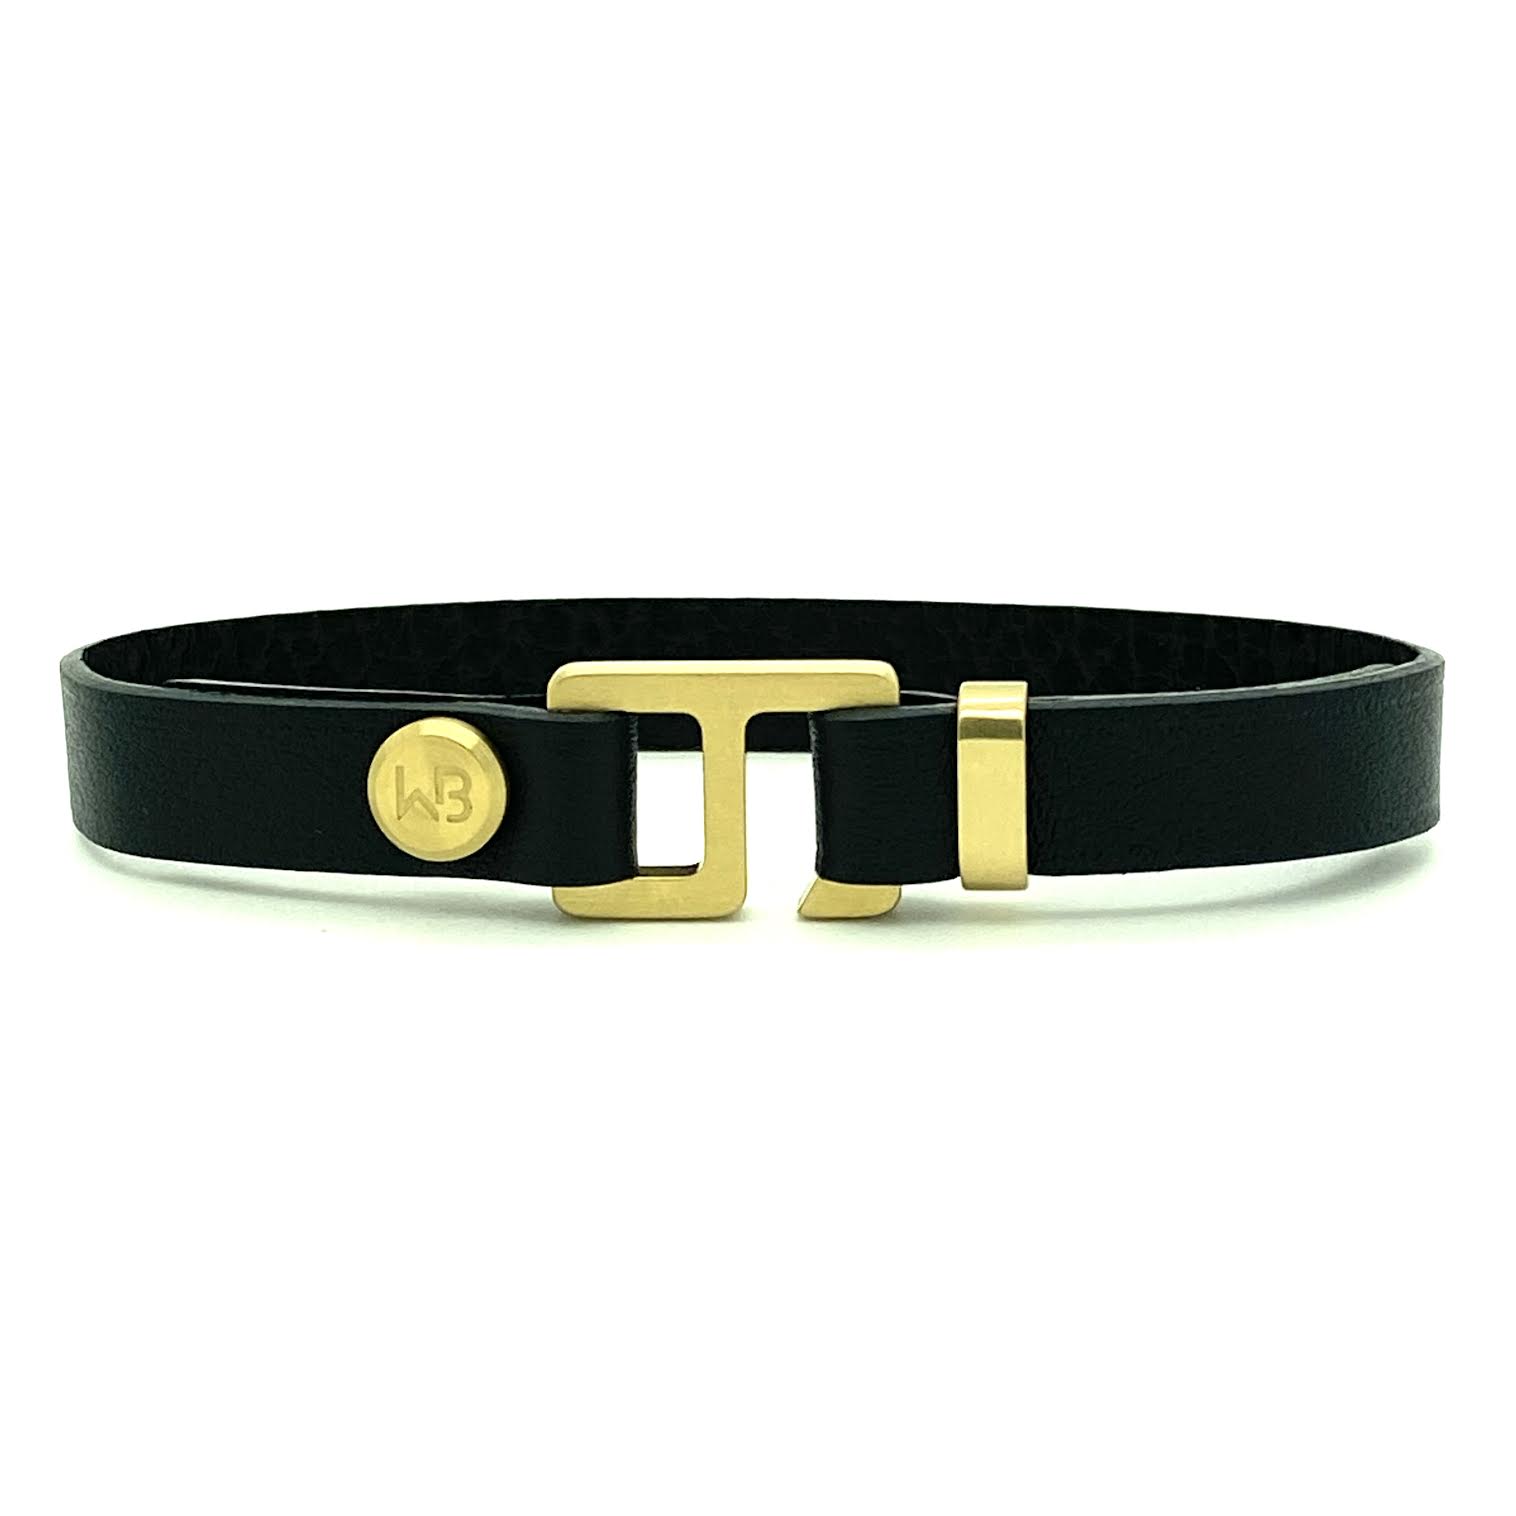 With a trendy, cool modern vibe, this black Italian leather cuff bracelet is paired with your choice of brushed stainless steel, brass or black ceramic hardware. Our signature cuff bracelet is a modern staple for your WristBend collection. Made by WristBend